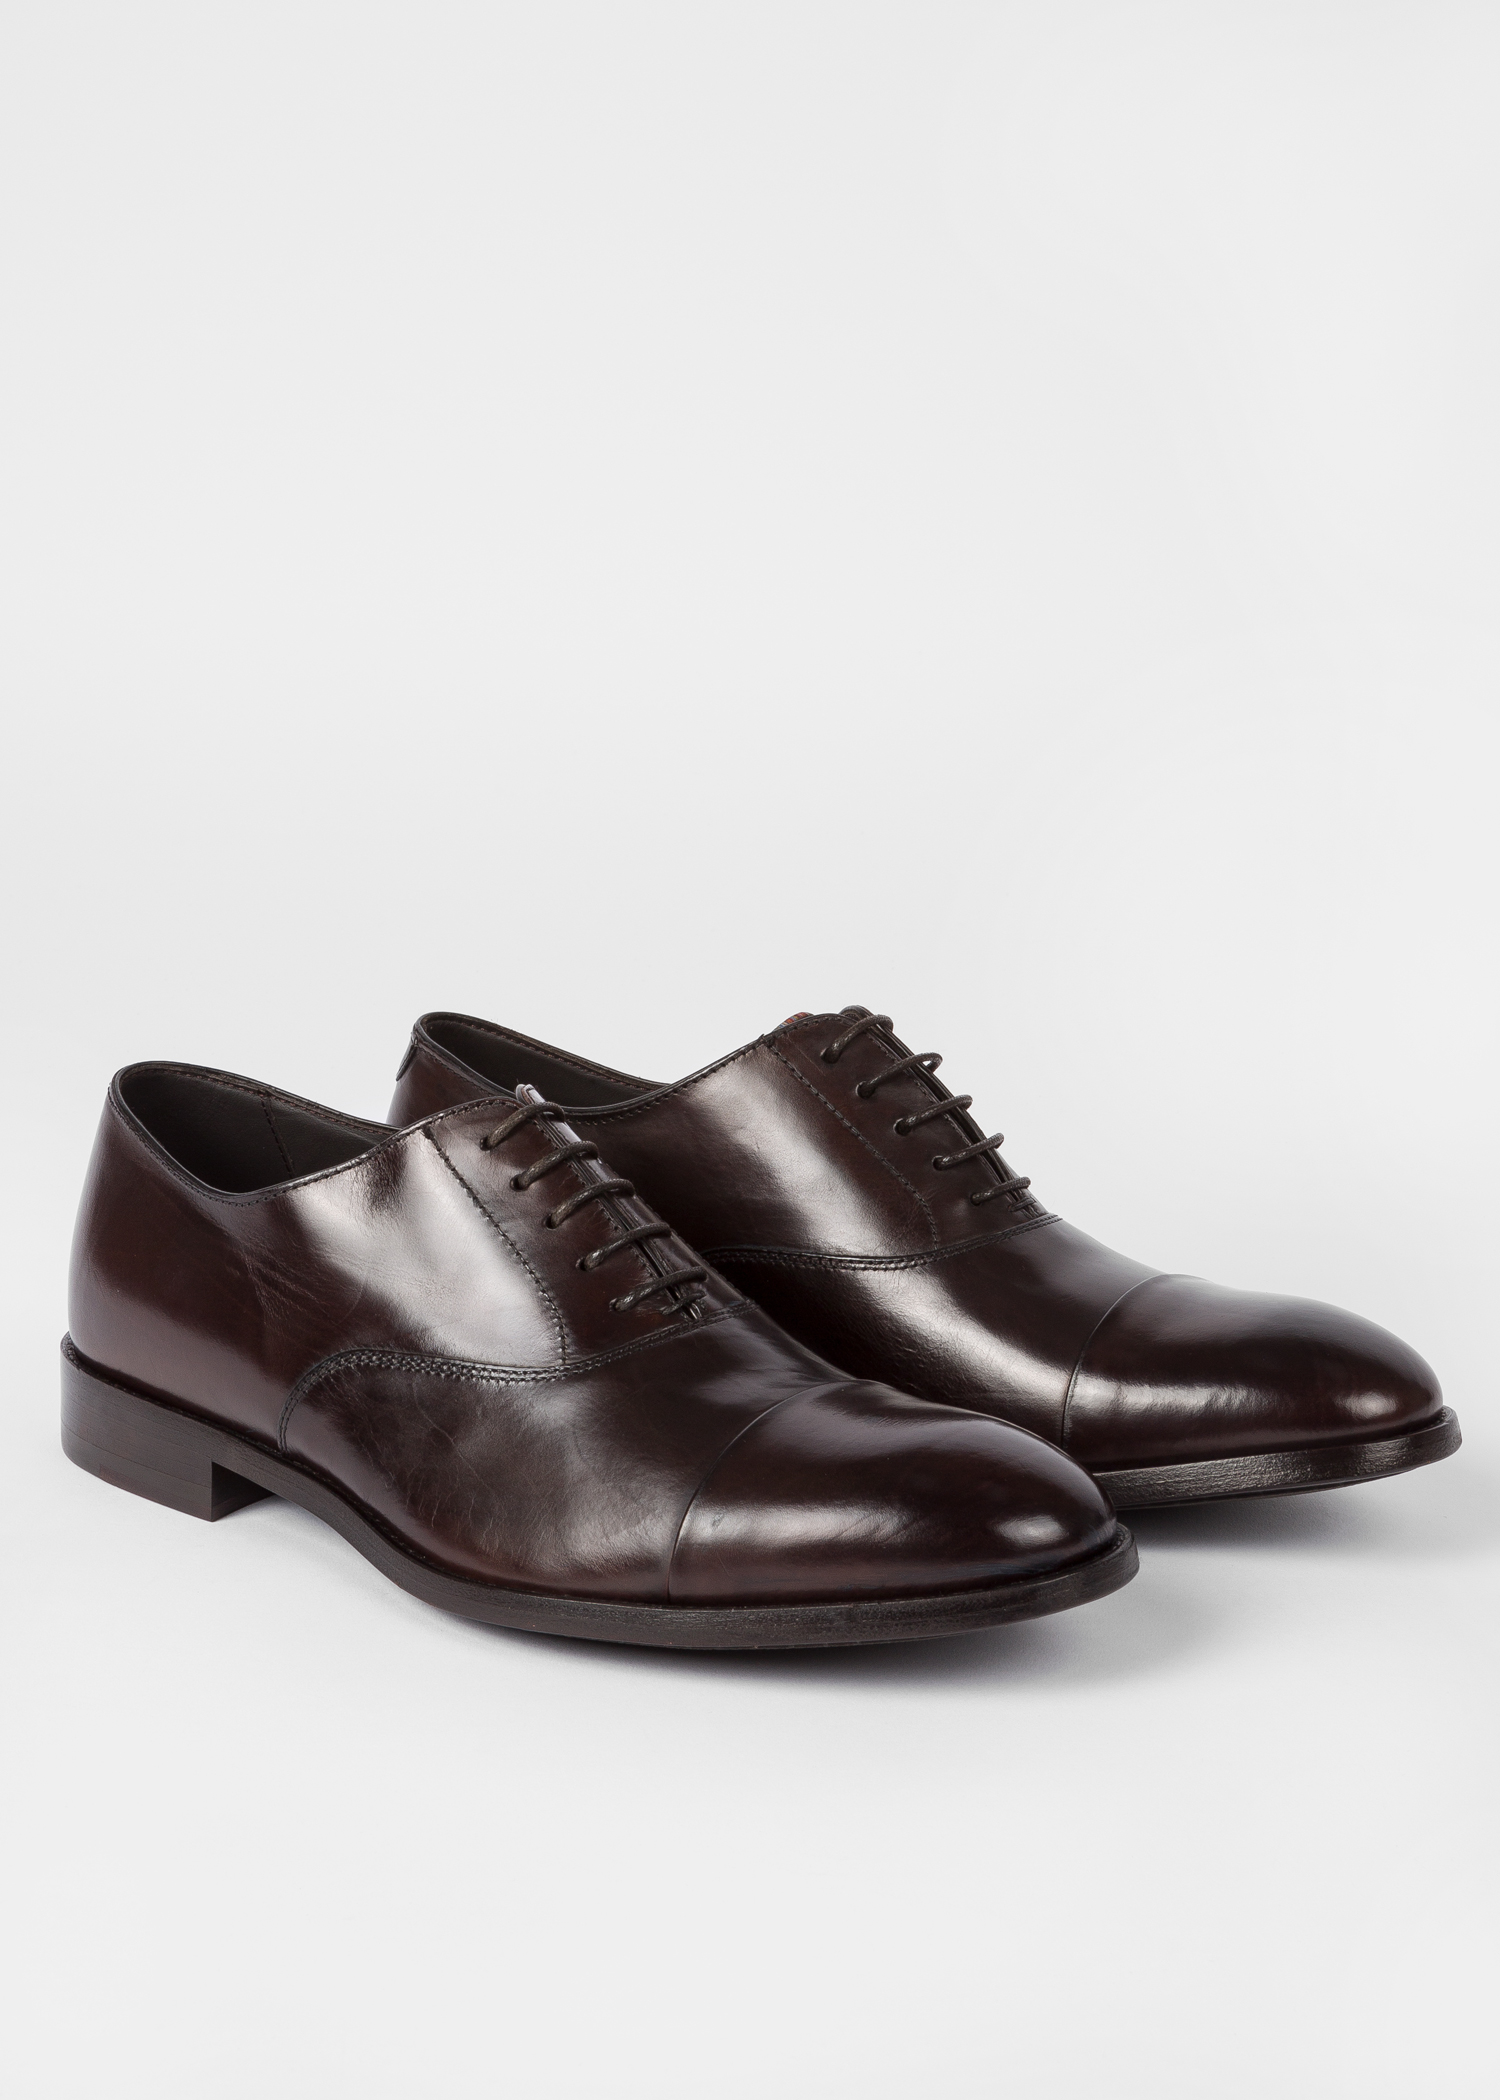 Angled View - Men's Chocolate Brown Leather 'Brent' Oxford Shoes With 'Signature Stripe' Details Paul Smith